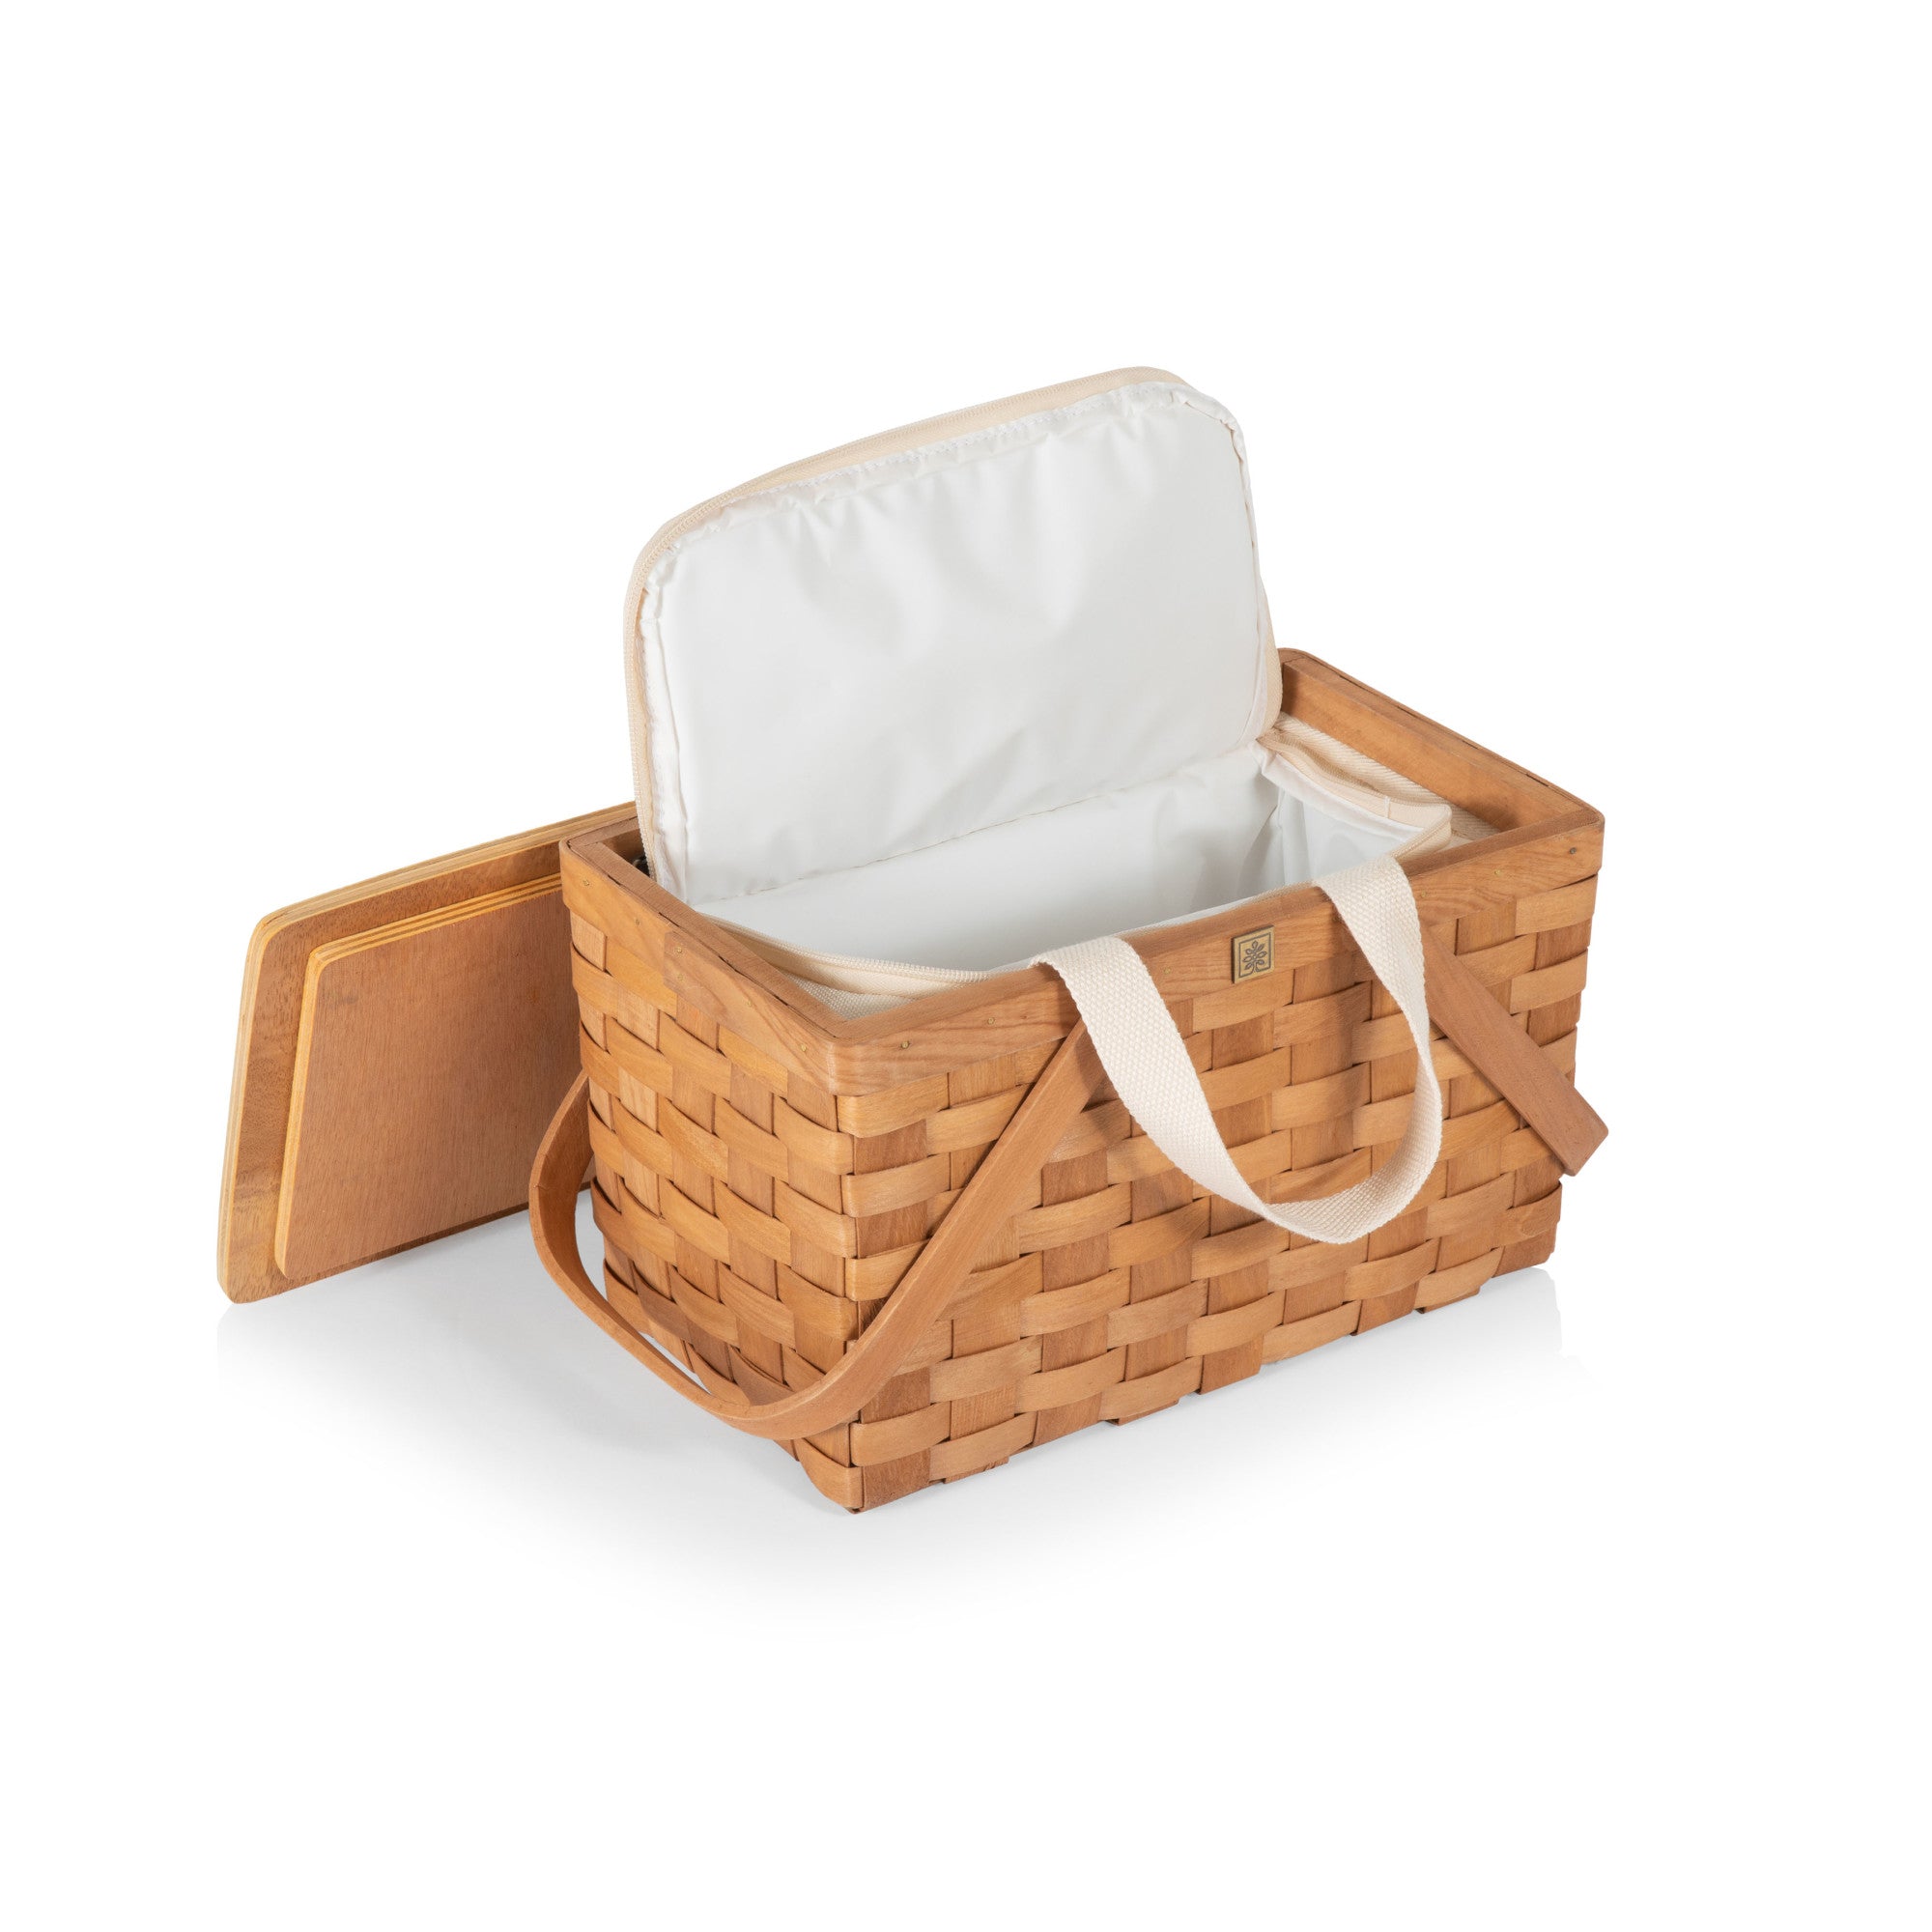 Cleveland Browns - Poppy Personal Picnic Basket